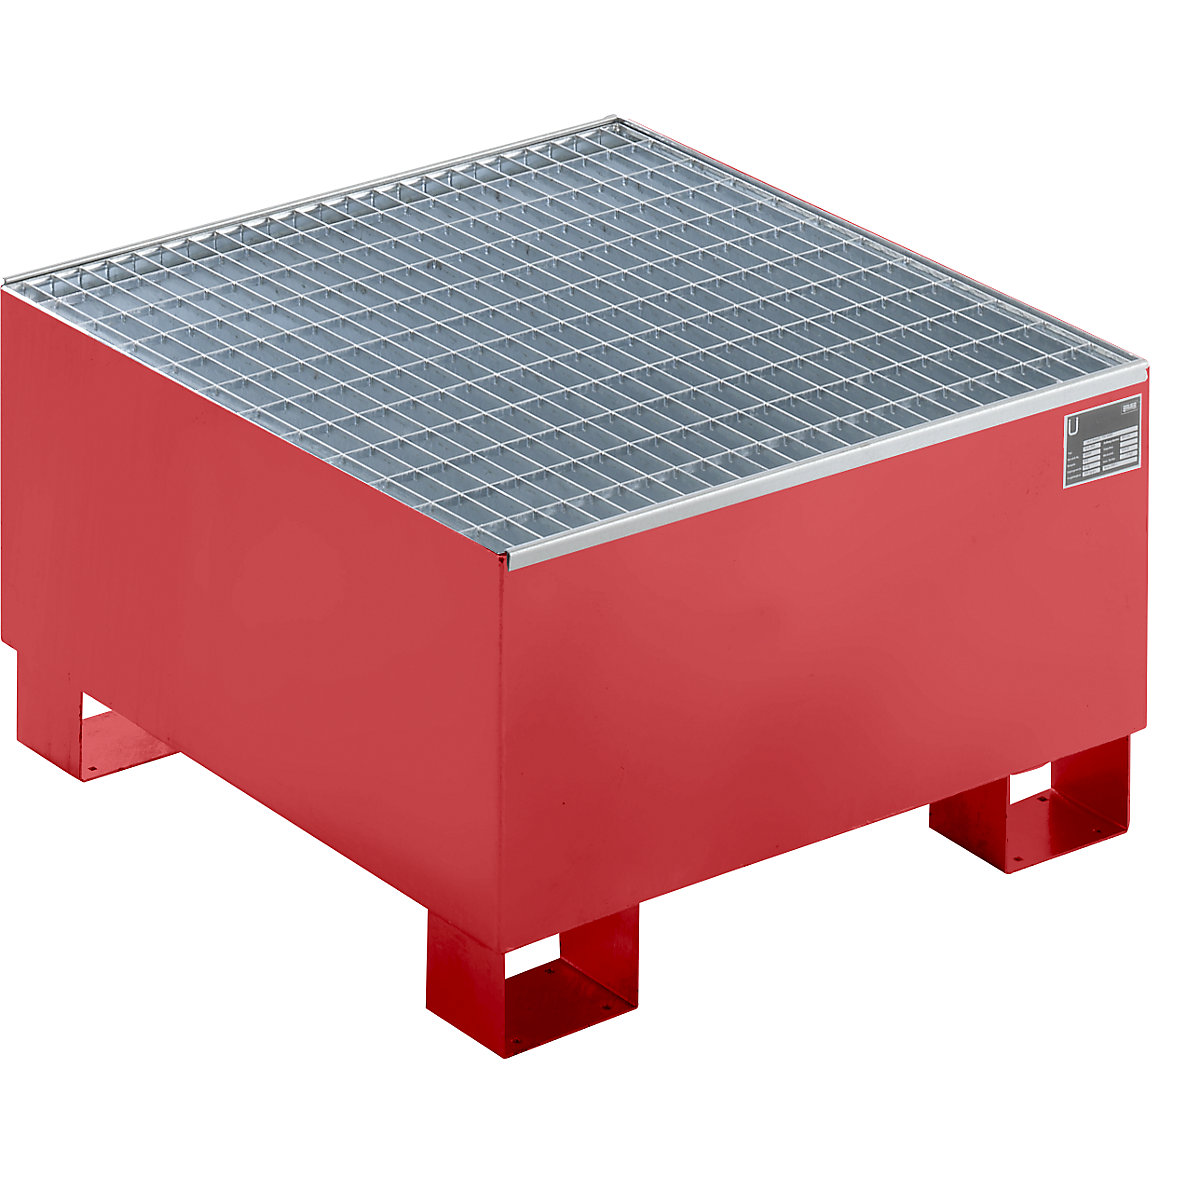 Sump tray made from sheet steel, LxWxH 800 x 800 x 465 mm, red RAL 3000, with grate